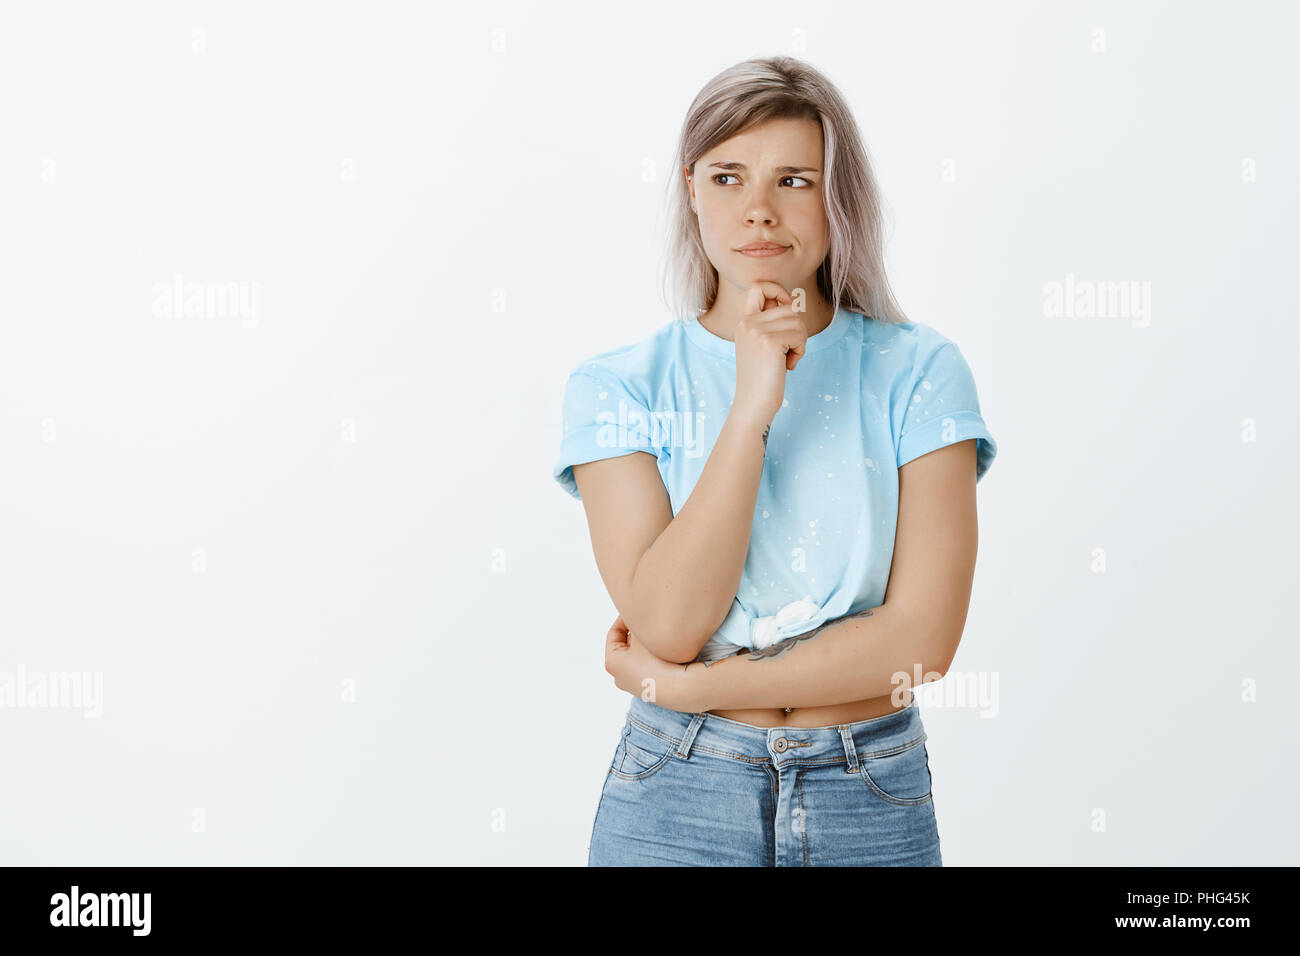 Girl feeling not sure about received suggestion. Doubtful intense charming woman with fair hair, frowning and pursing lips while holding hand on chin and looking aside, thinking, making choice Stock Photo